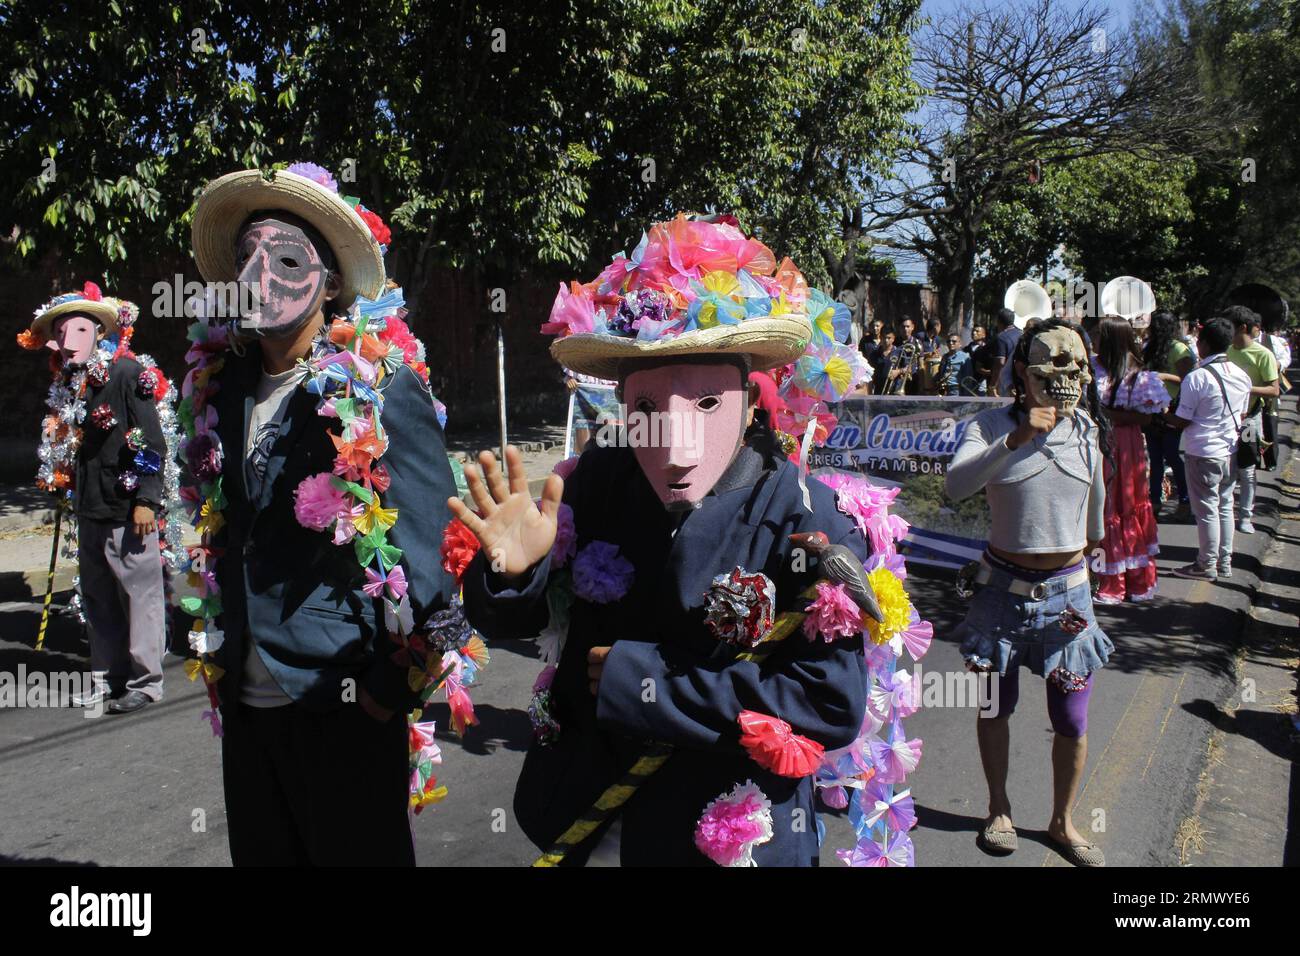 (141116) -- SAN SALVADOR, Nov. 16, 2014 -- Disguised residents attend the Fair of Living Towns 2014 in San Salvador, capital of El Salvador, Nov. 15, 2014. Luis Galdamez)(hy) EL SALVADOR-SAN SALVADOR-SOCIETY-FAIR e LUISxGALDAMEZ PUBLICATIONxNOTxINxCHN   San Salvador Nov 16 2014 disguised Residents attend The Fair of Living Towns 2014 in San Salvador Capital of El Salvador Nov 15 2014 Luis  Hy El Salvador San Salvador Society Fair e  PUBLICATIONxNOTxINxCHN Stock Photo